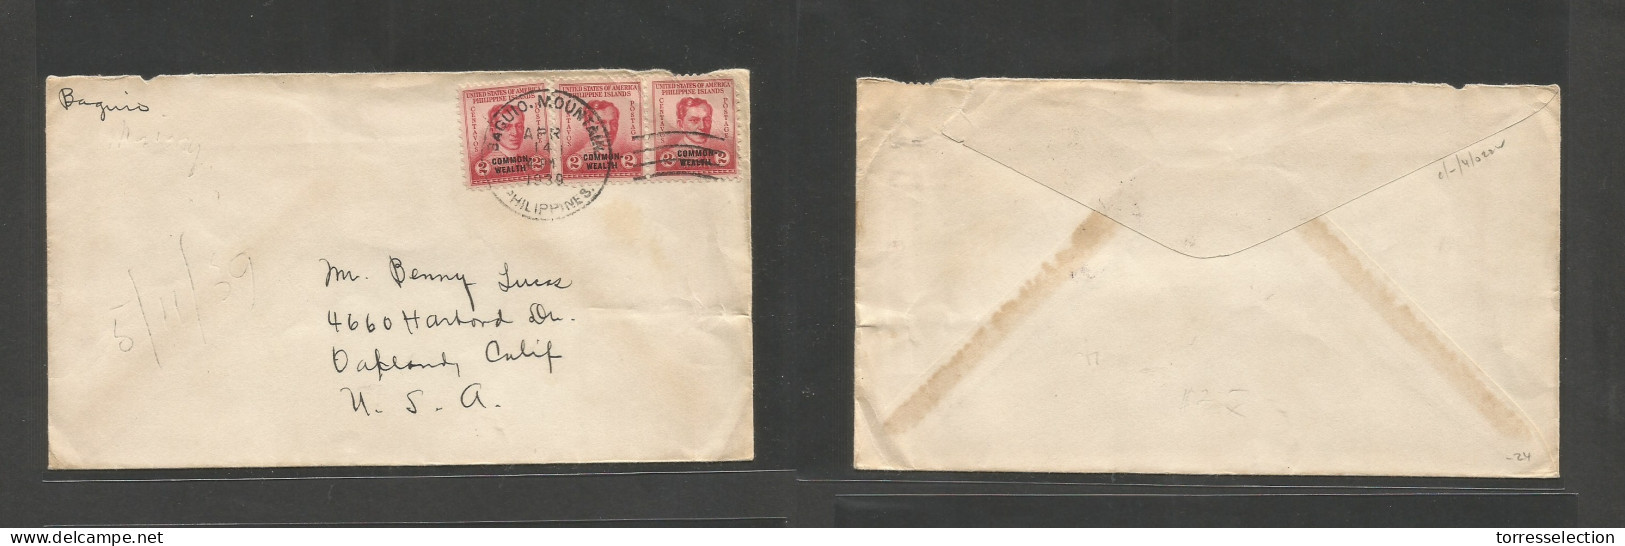 PHILIPPINES. 1939 (14 Apr) Baguio Mountains - USA, Oakland. Multifkd Env At 6c Rate, Rolling Cds. VF Origin. - Filippine